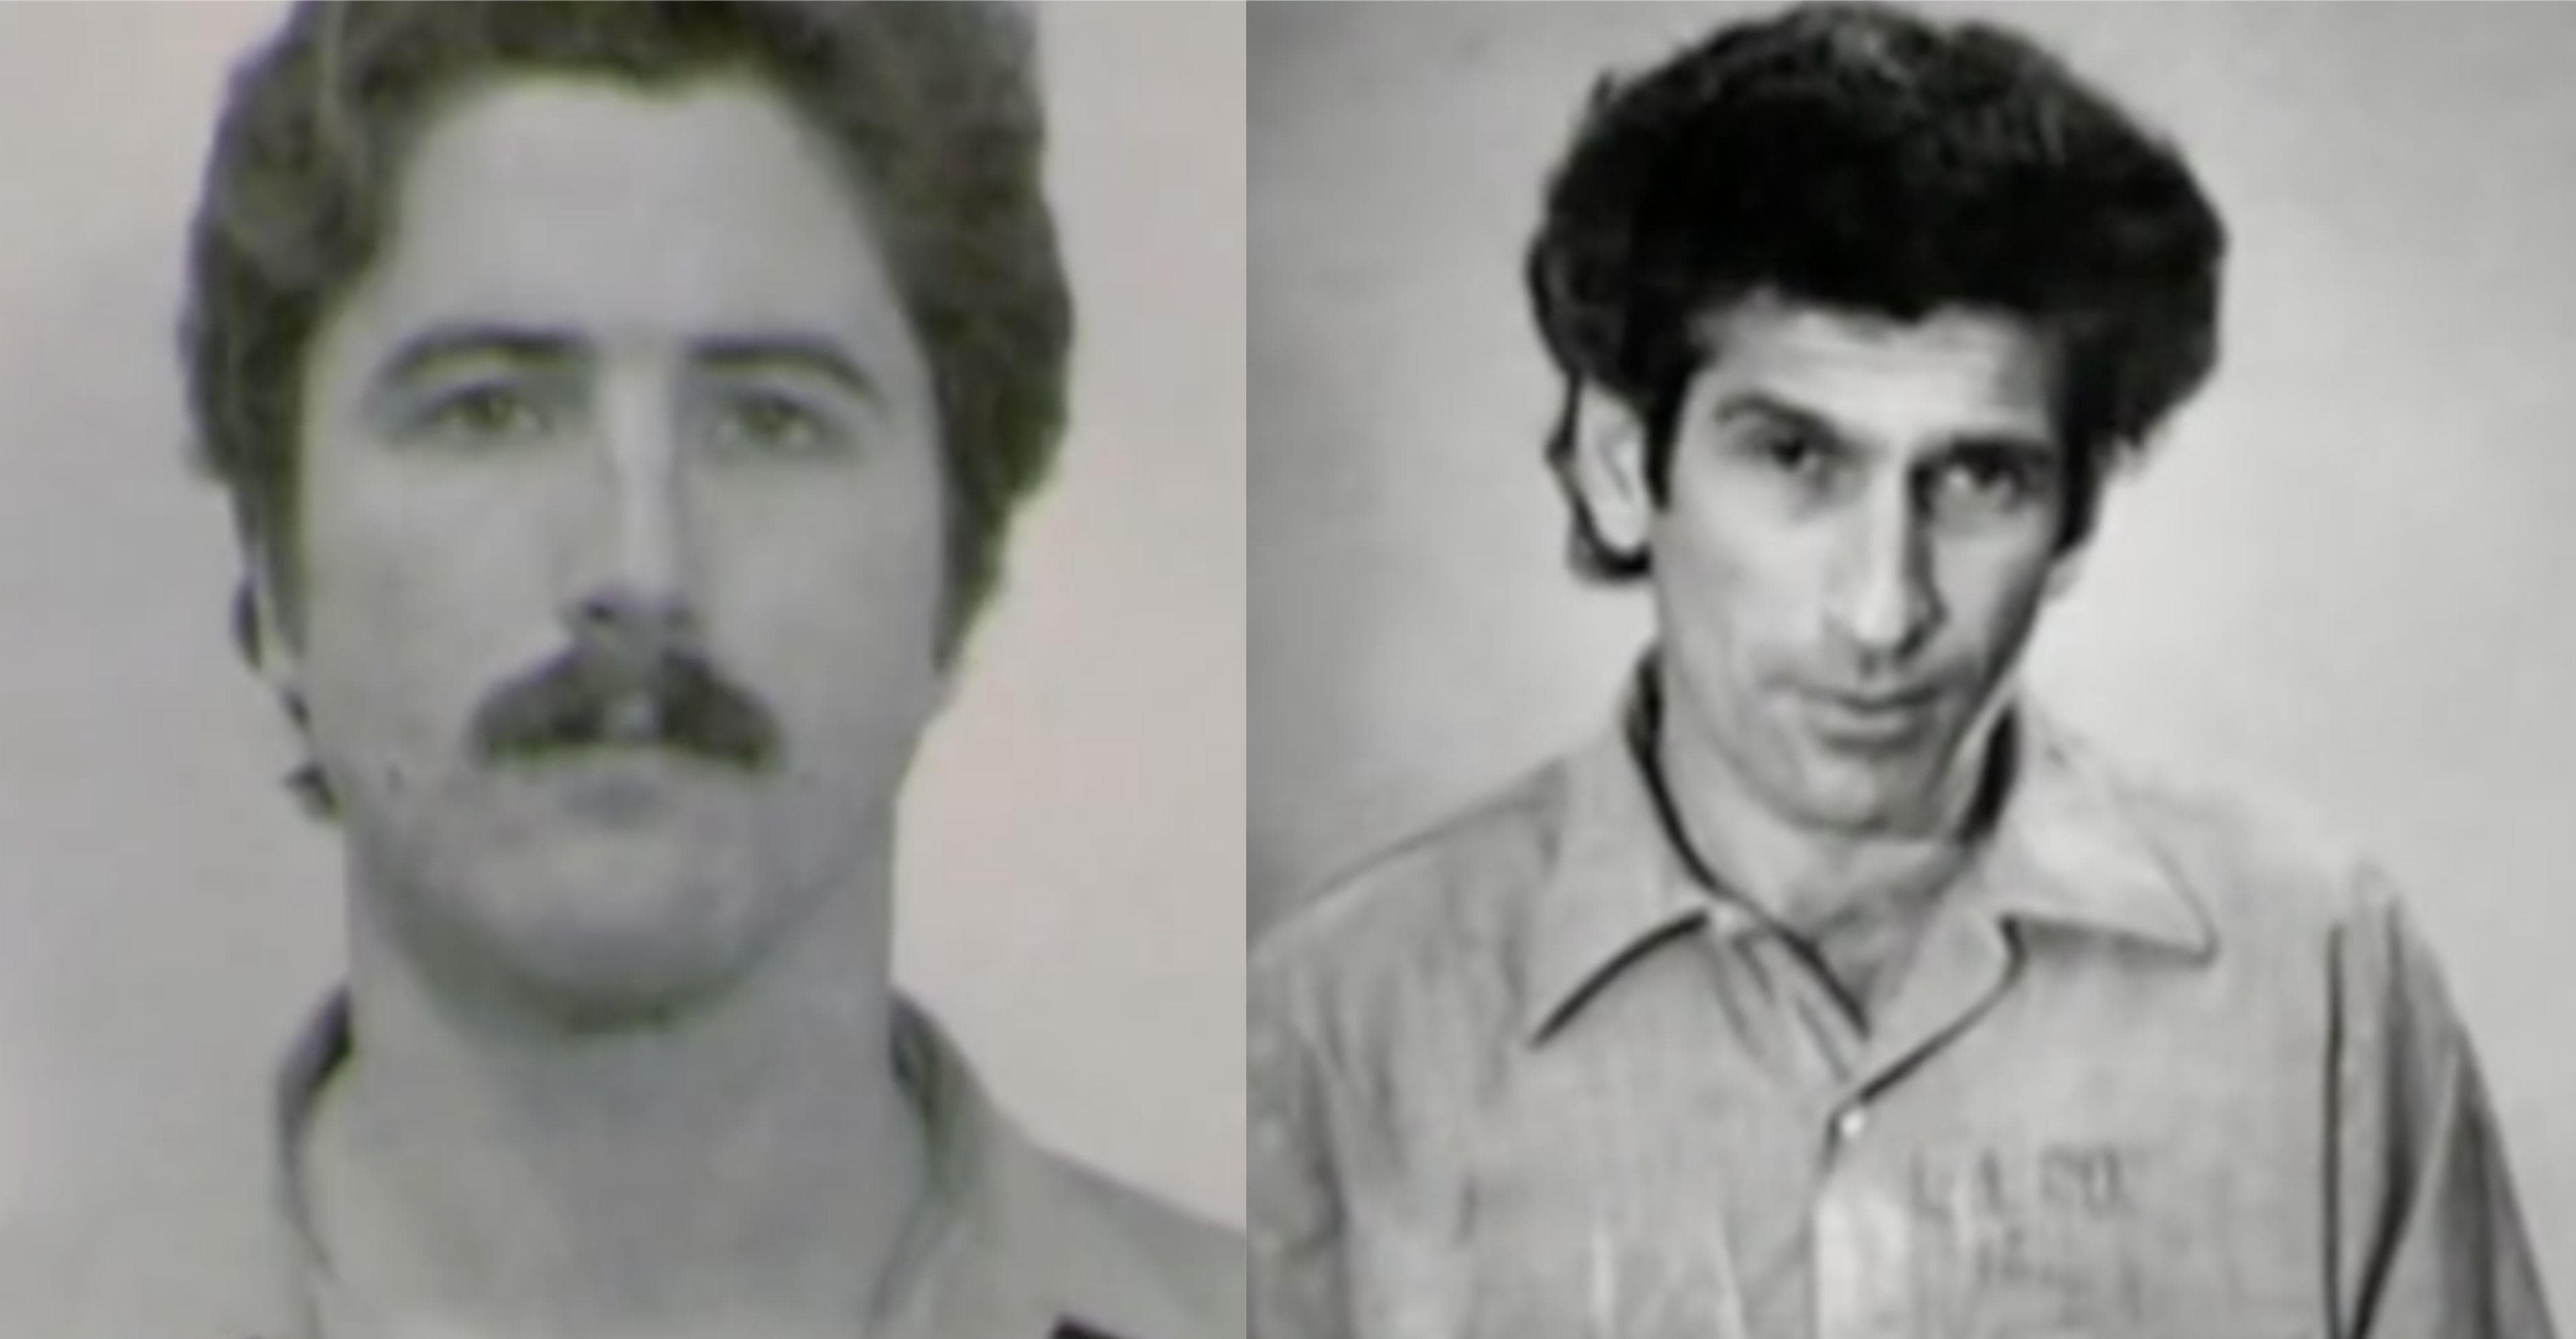 The Hillside Stranglers Were Some Of California S Most Iconic Killers And One Of Their Defense